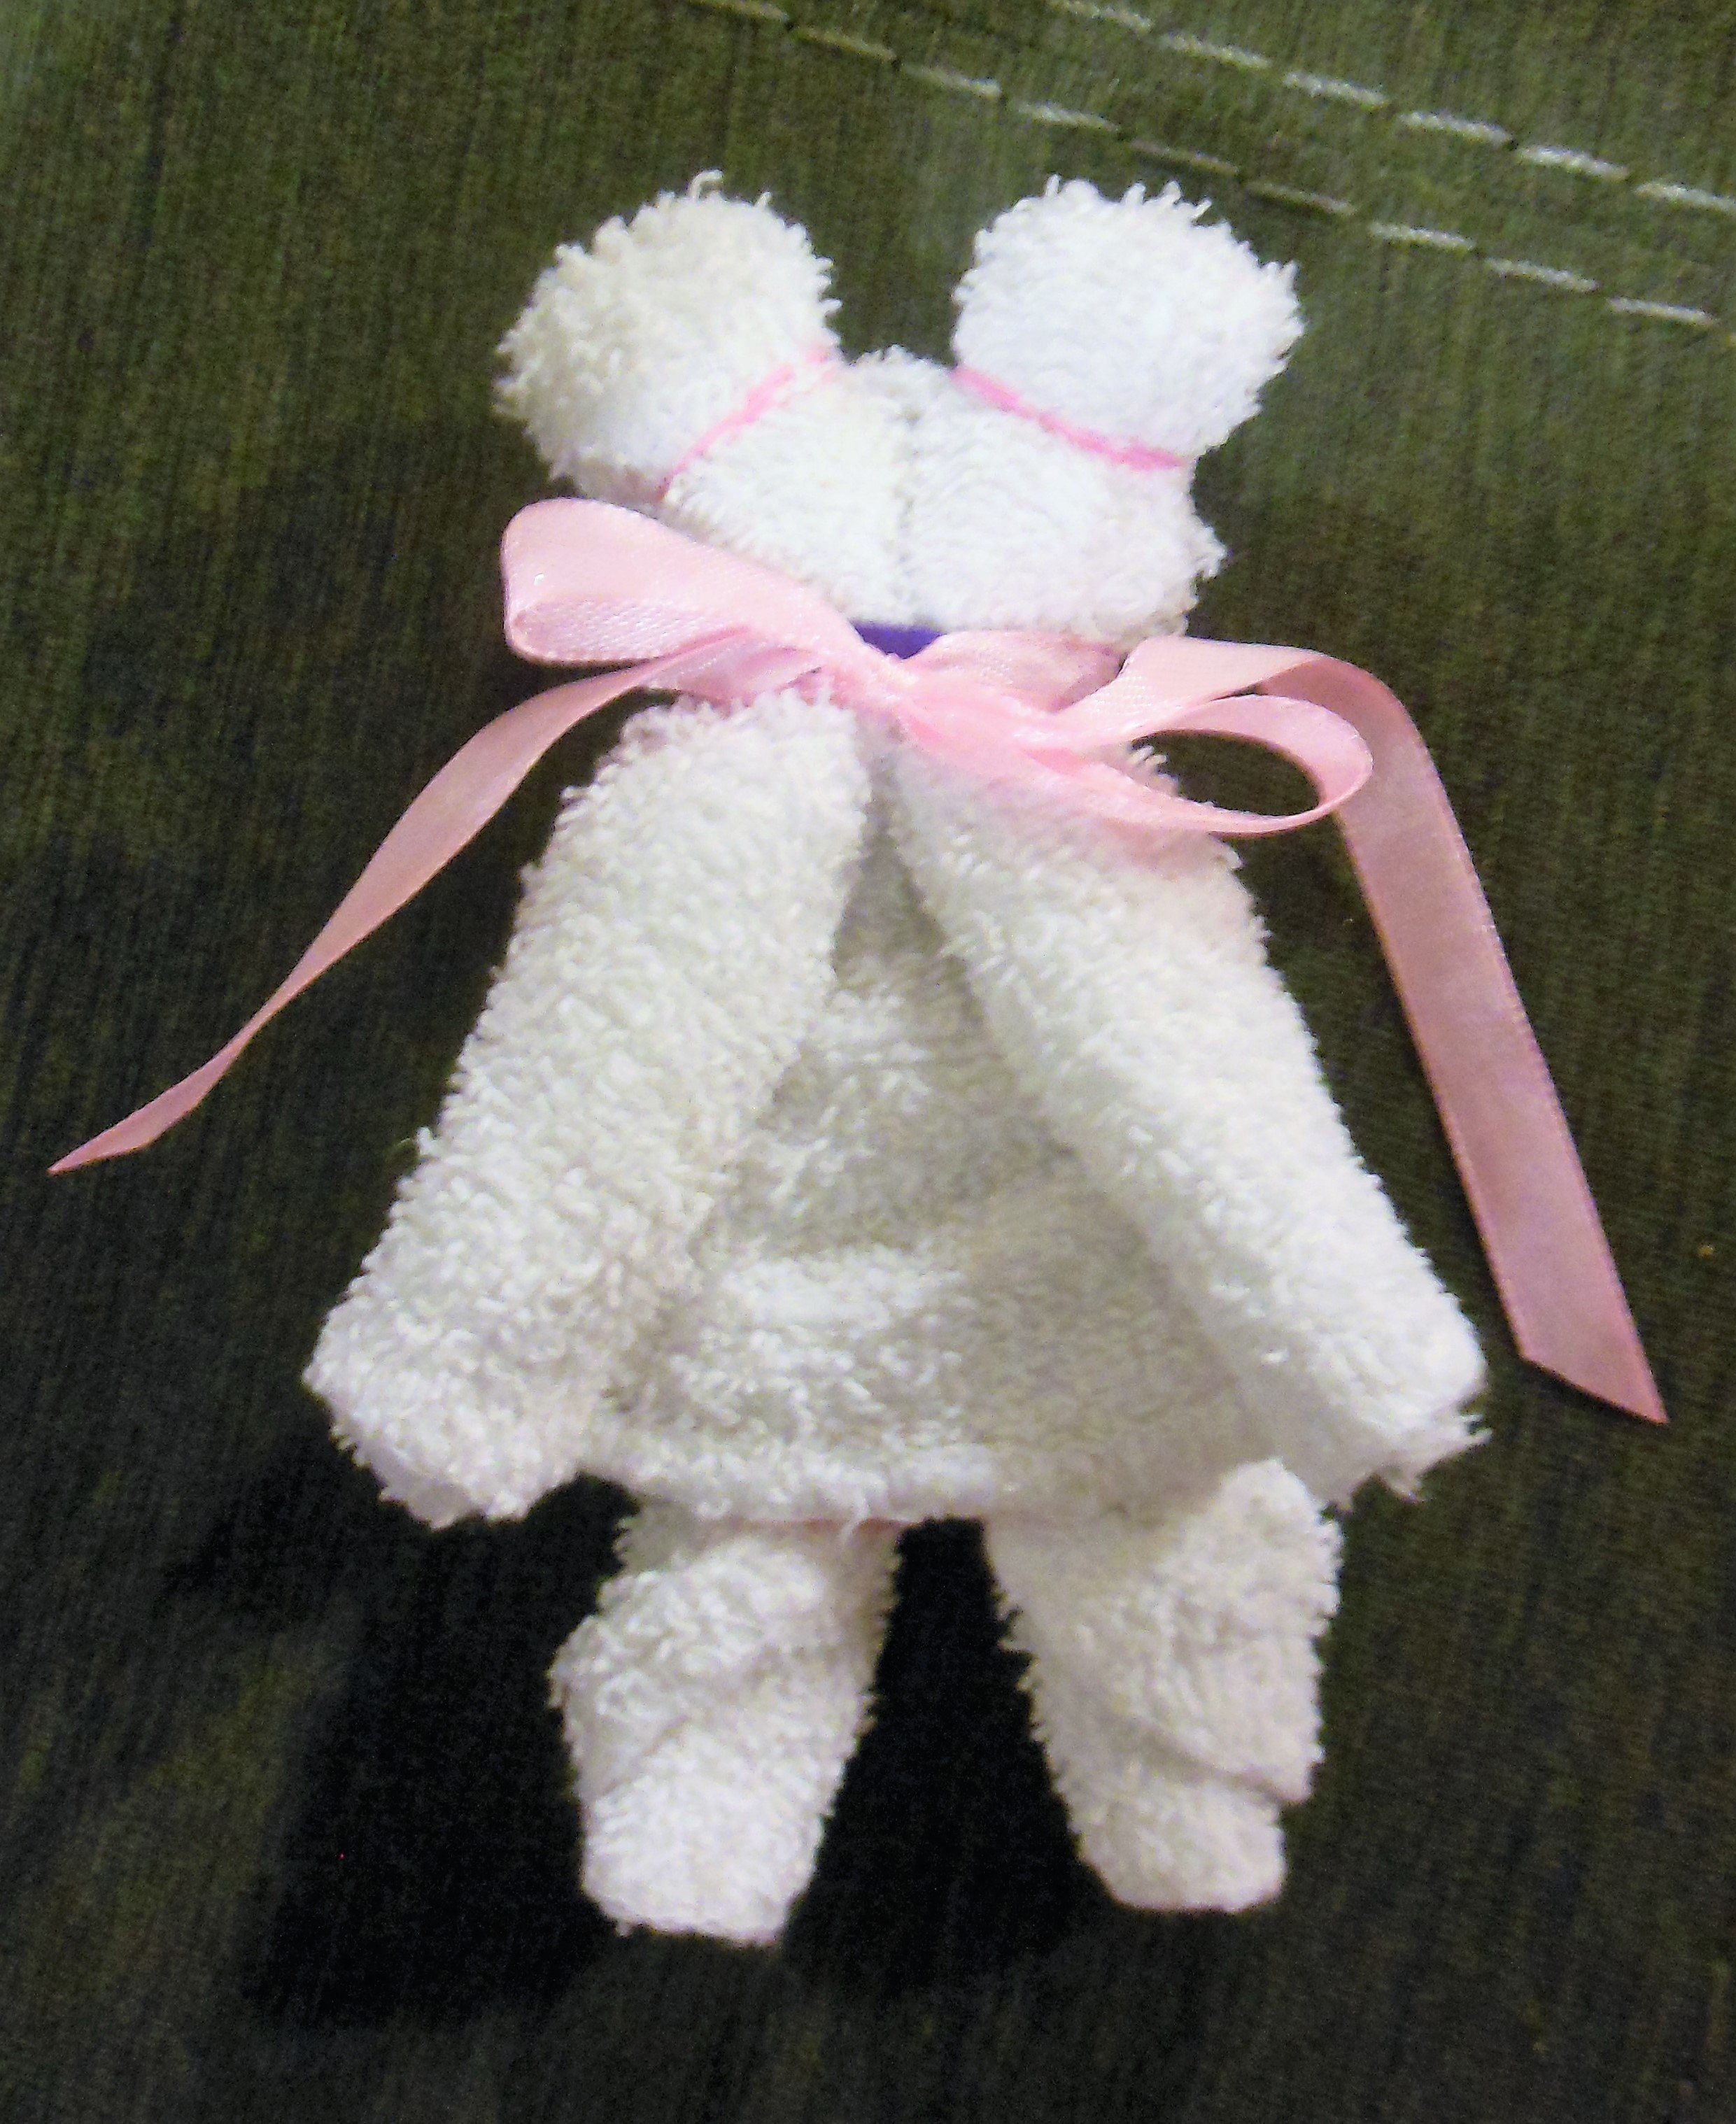 This Washcloth Teddy Bear is so easy to make and just adorable! We will be making these with our youth group this Sunday evening to add to our shoeboxes for Operation Christmas Child through Samaritan's Purse. This gives our youth a chance to really get involved with the Christmas shoeboxes. We want them to experience the blessing of giving to others this Christmas season.